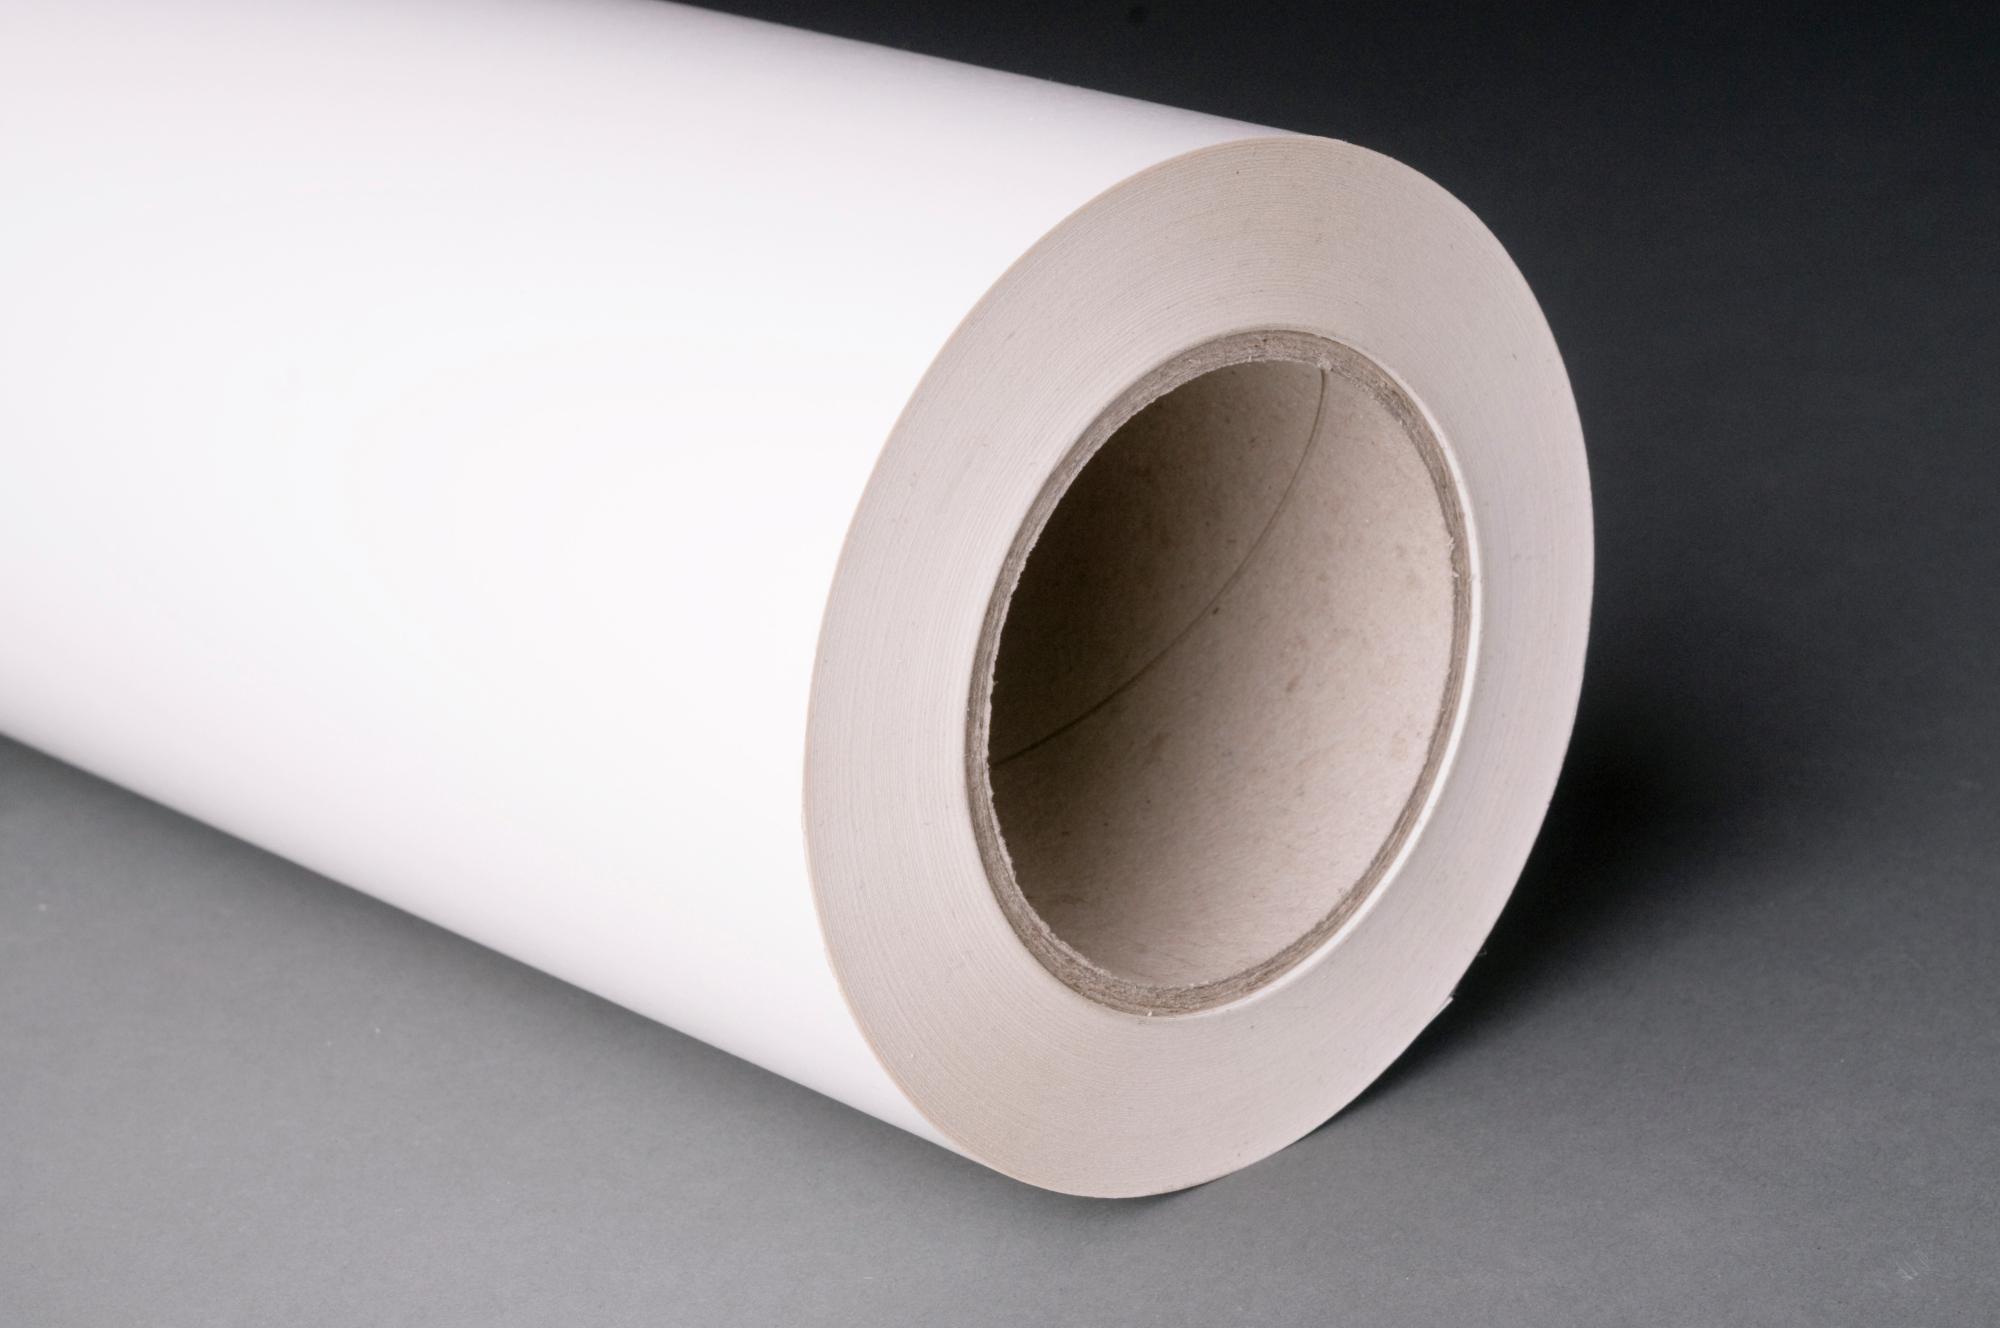 Cold Mounting Film for rough surfaces, Pressure Sensitive Film - size: 1040mmx5m